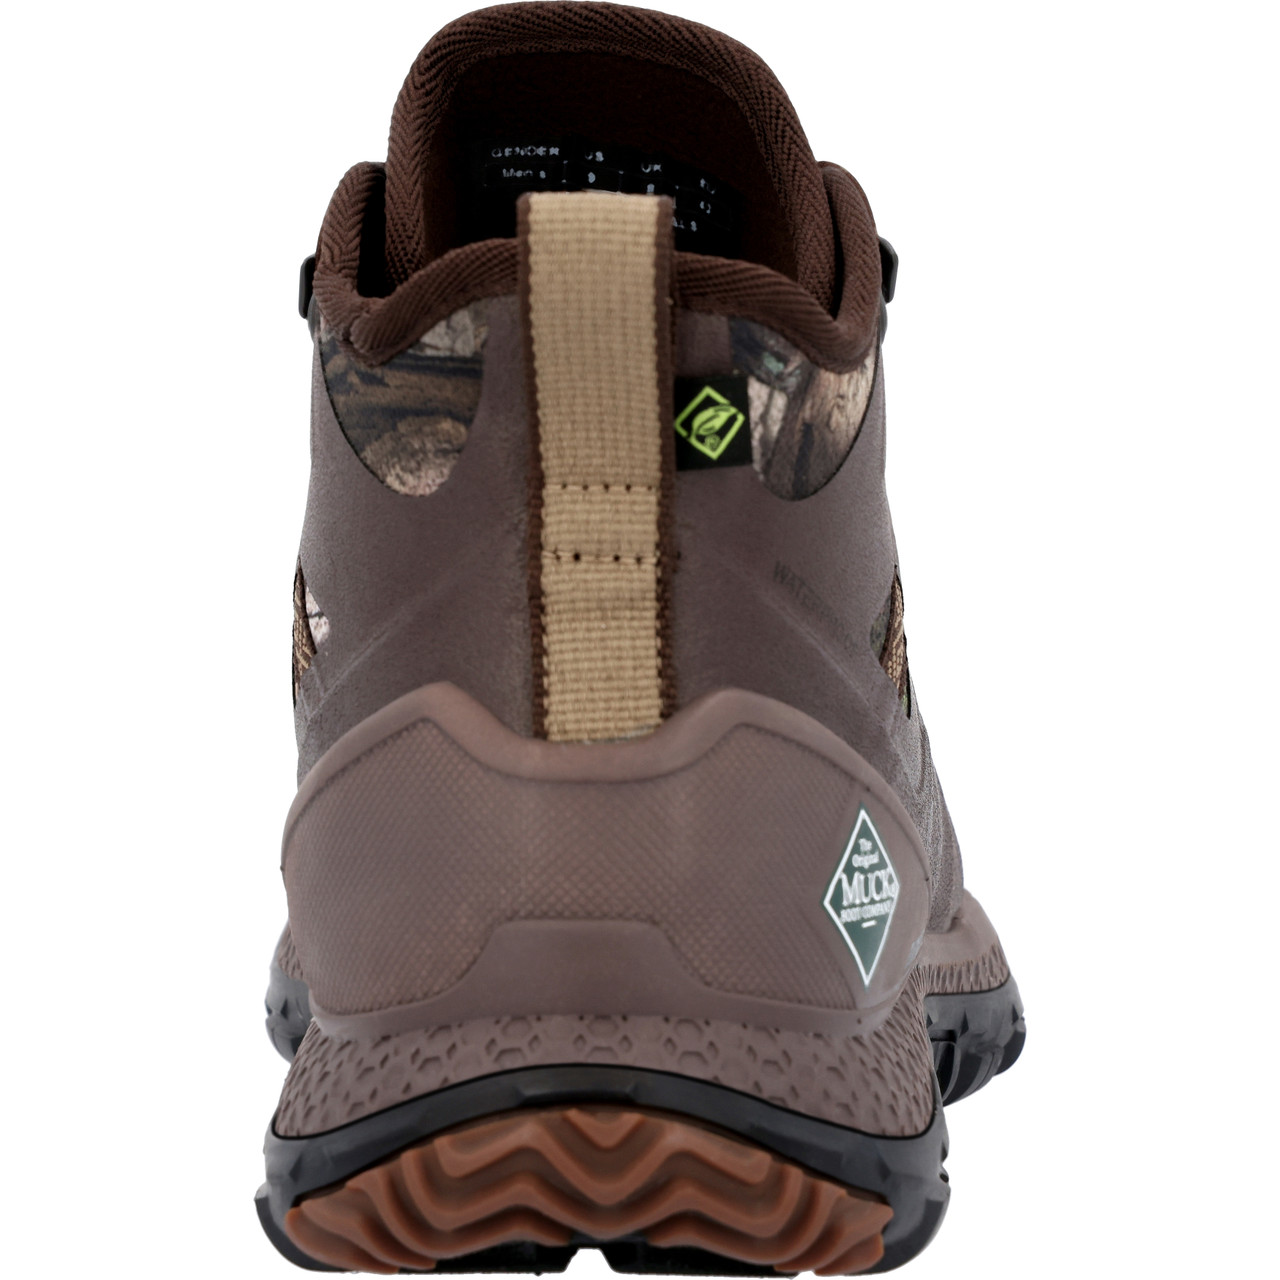 MUCK MOSSY OAK® COUNTRY DNA™ OUTSCAPE MAX LACE UP HIKER BOOTS MTLMDNA